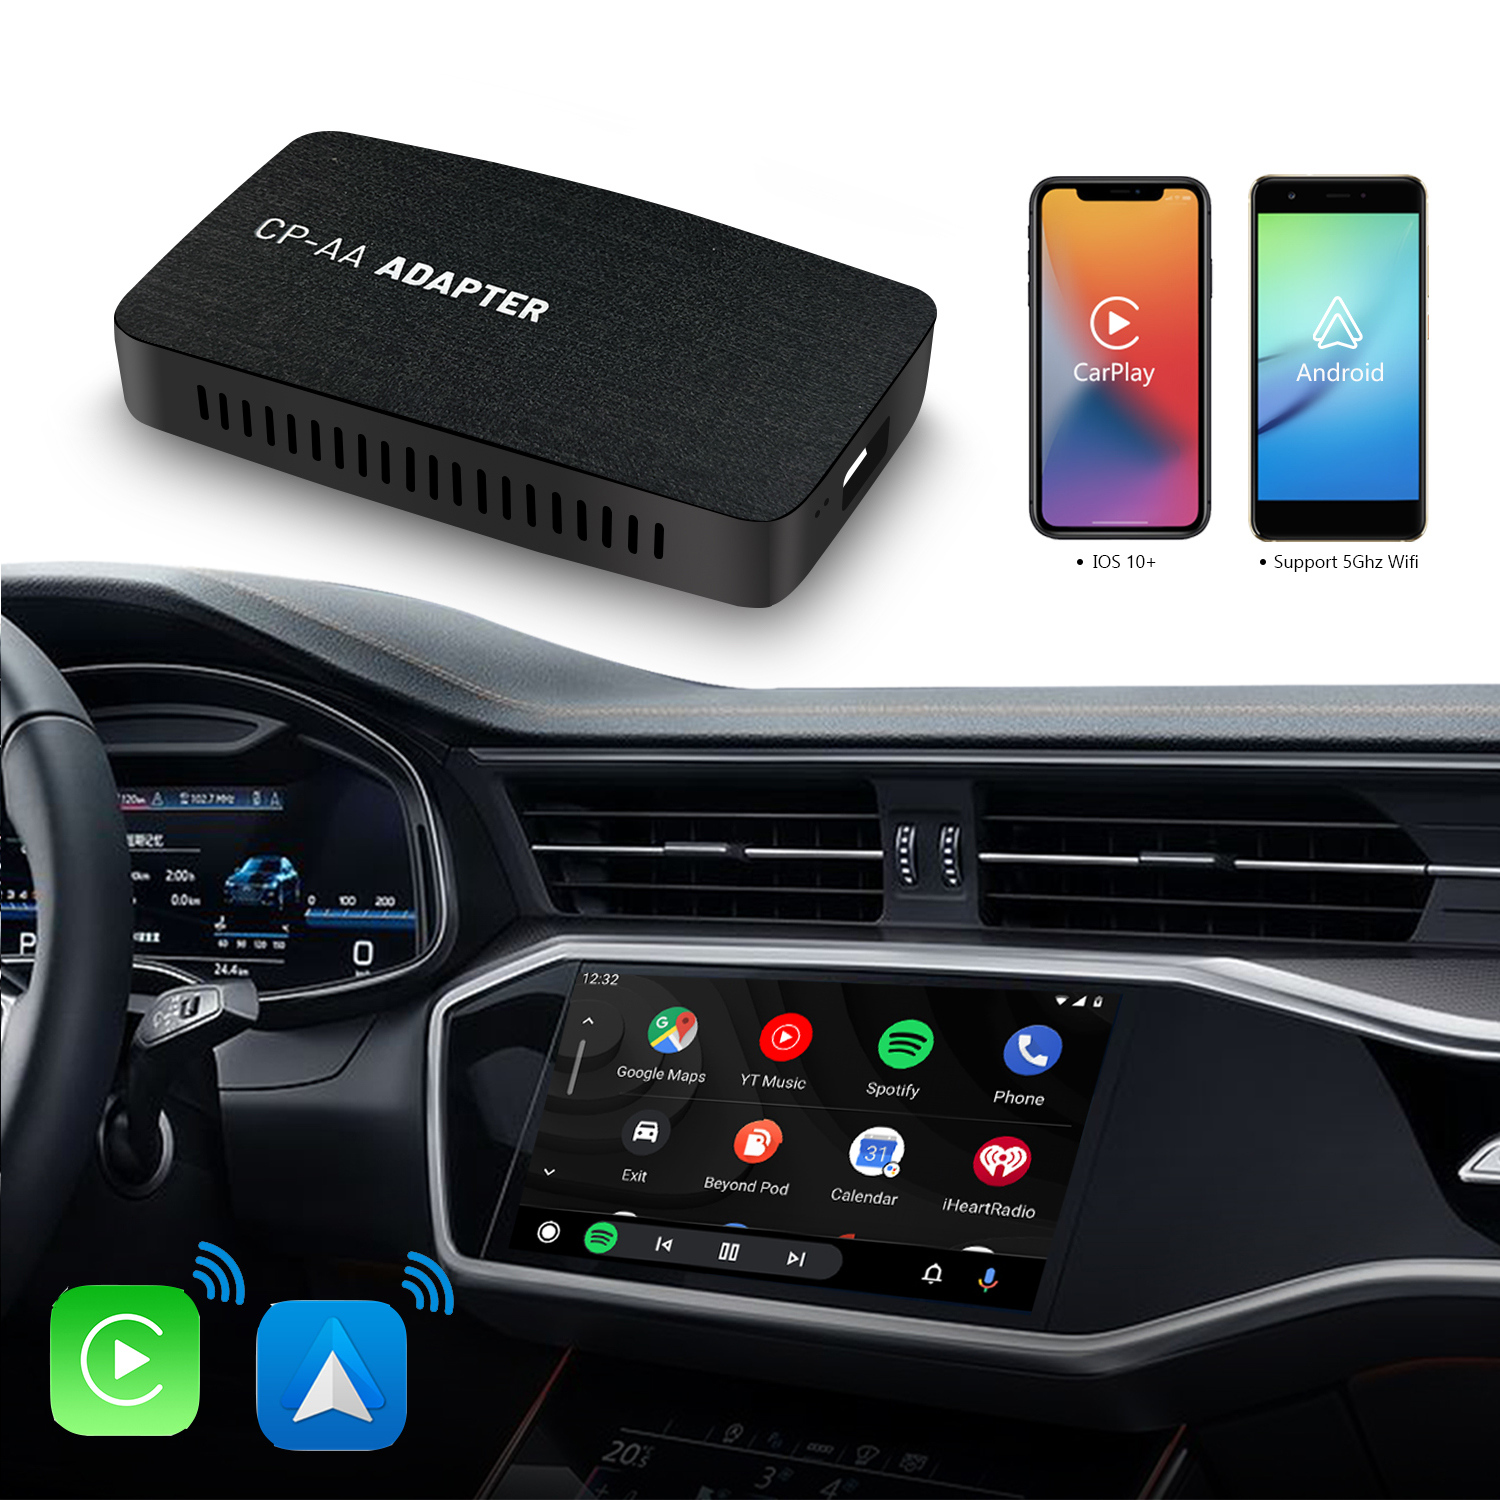 AAwireless Android Auto adapter for Android smartphone use